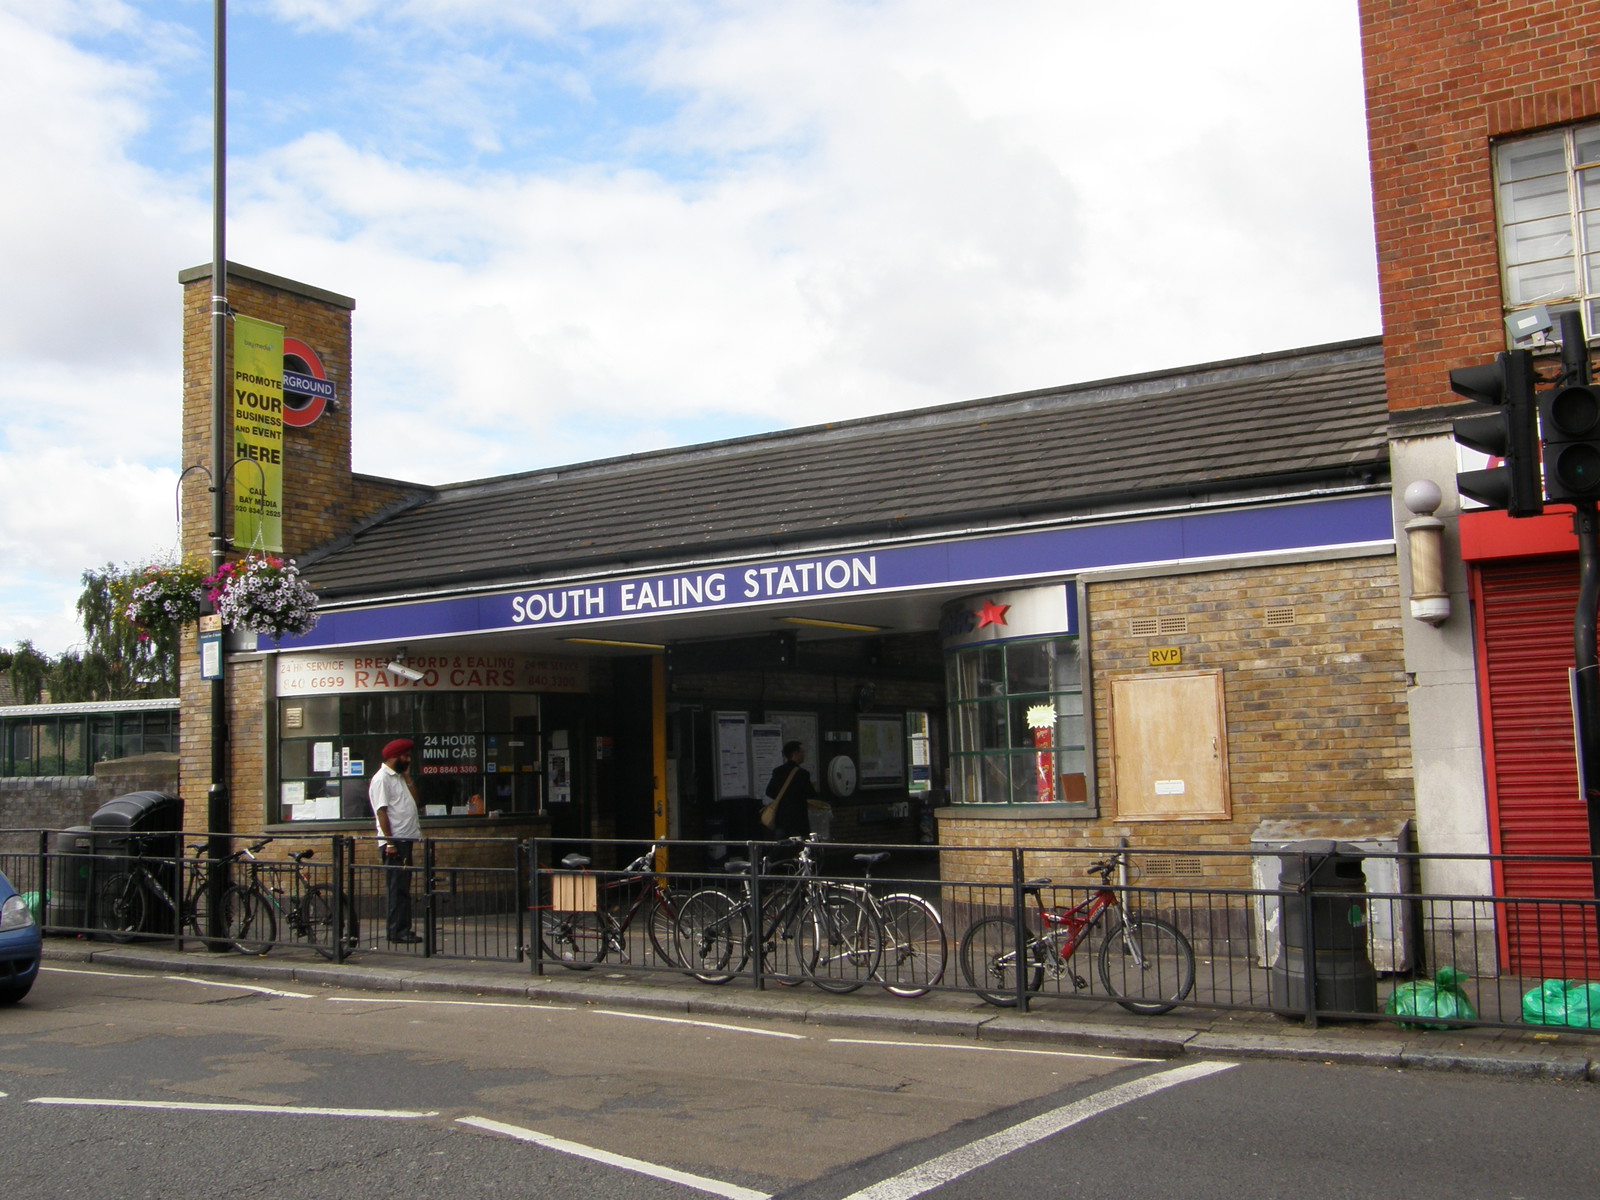 South Ealing station